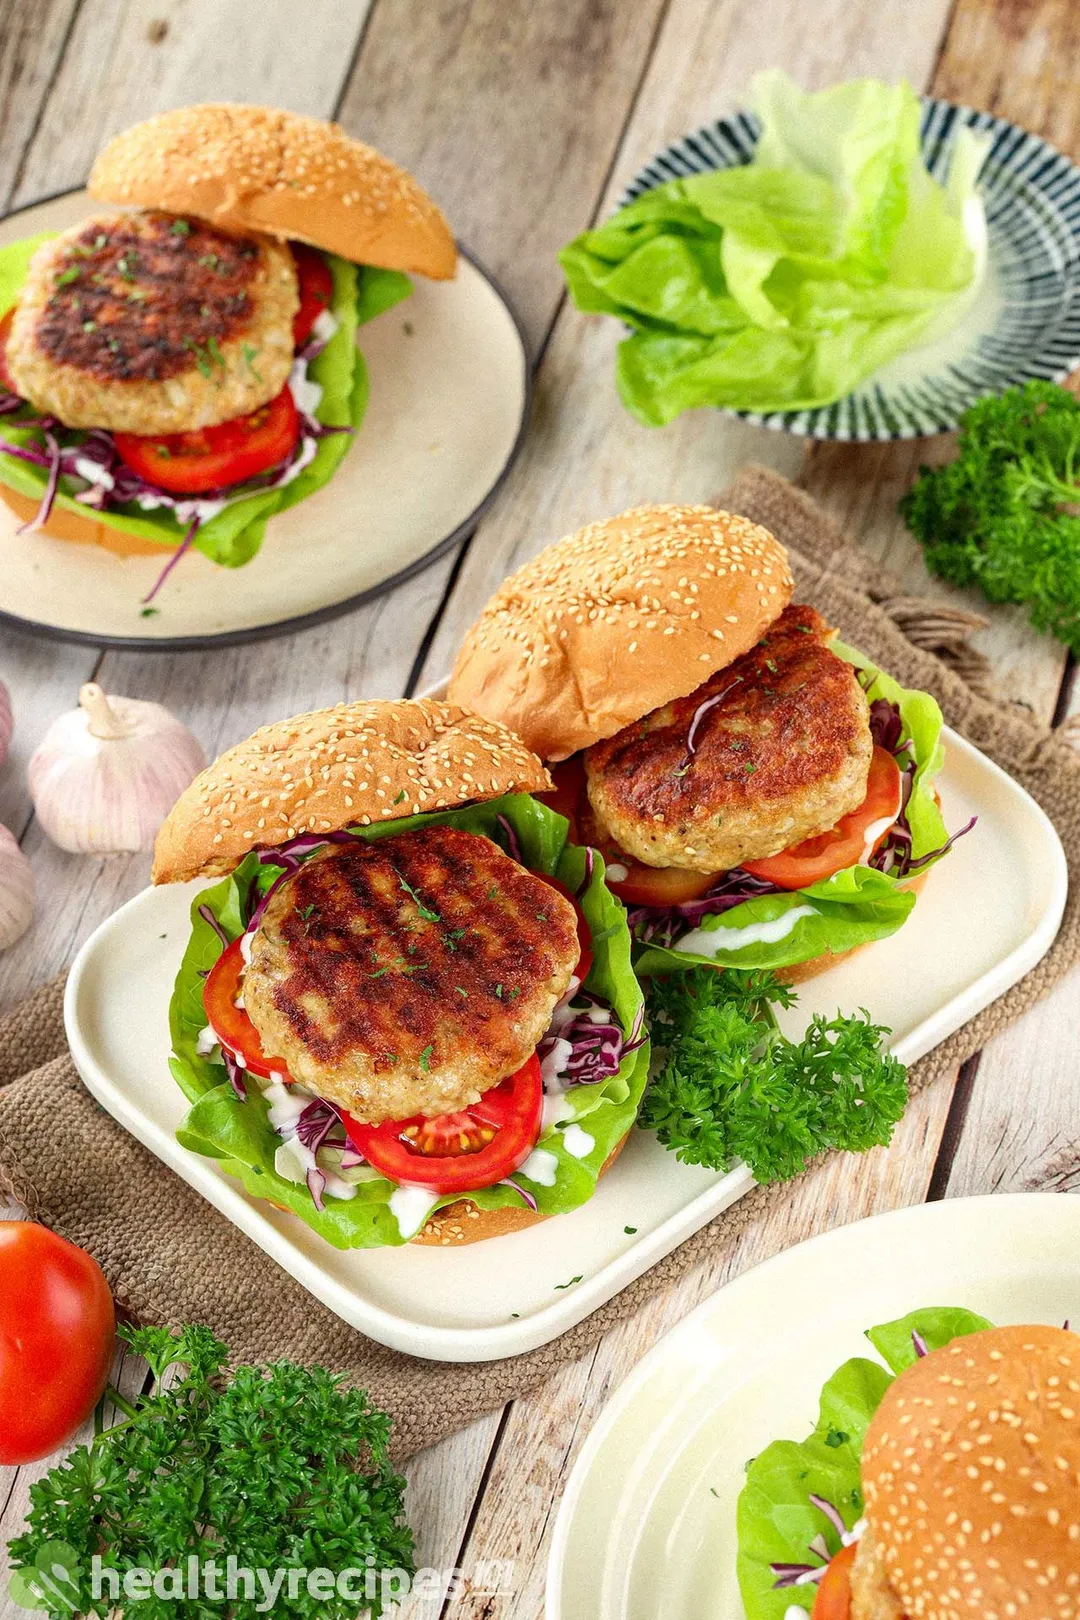 Plates of burgers containing meat patties, tomatoes, shredded cabbage, and lettuce, decorated by parsley and a brown fabric